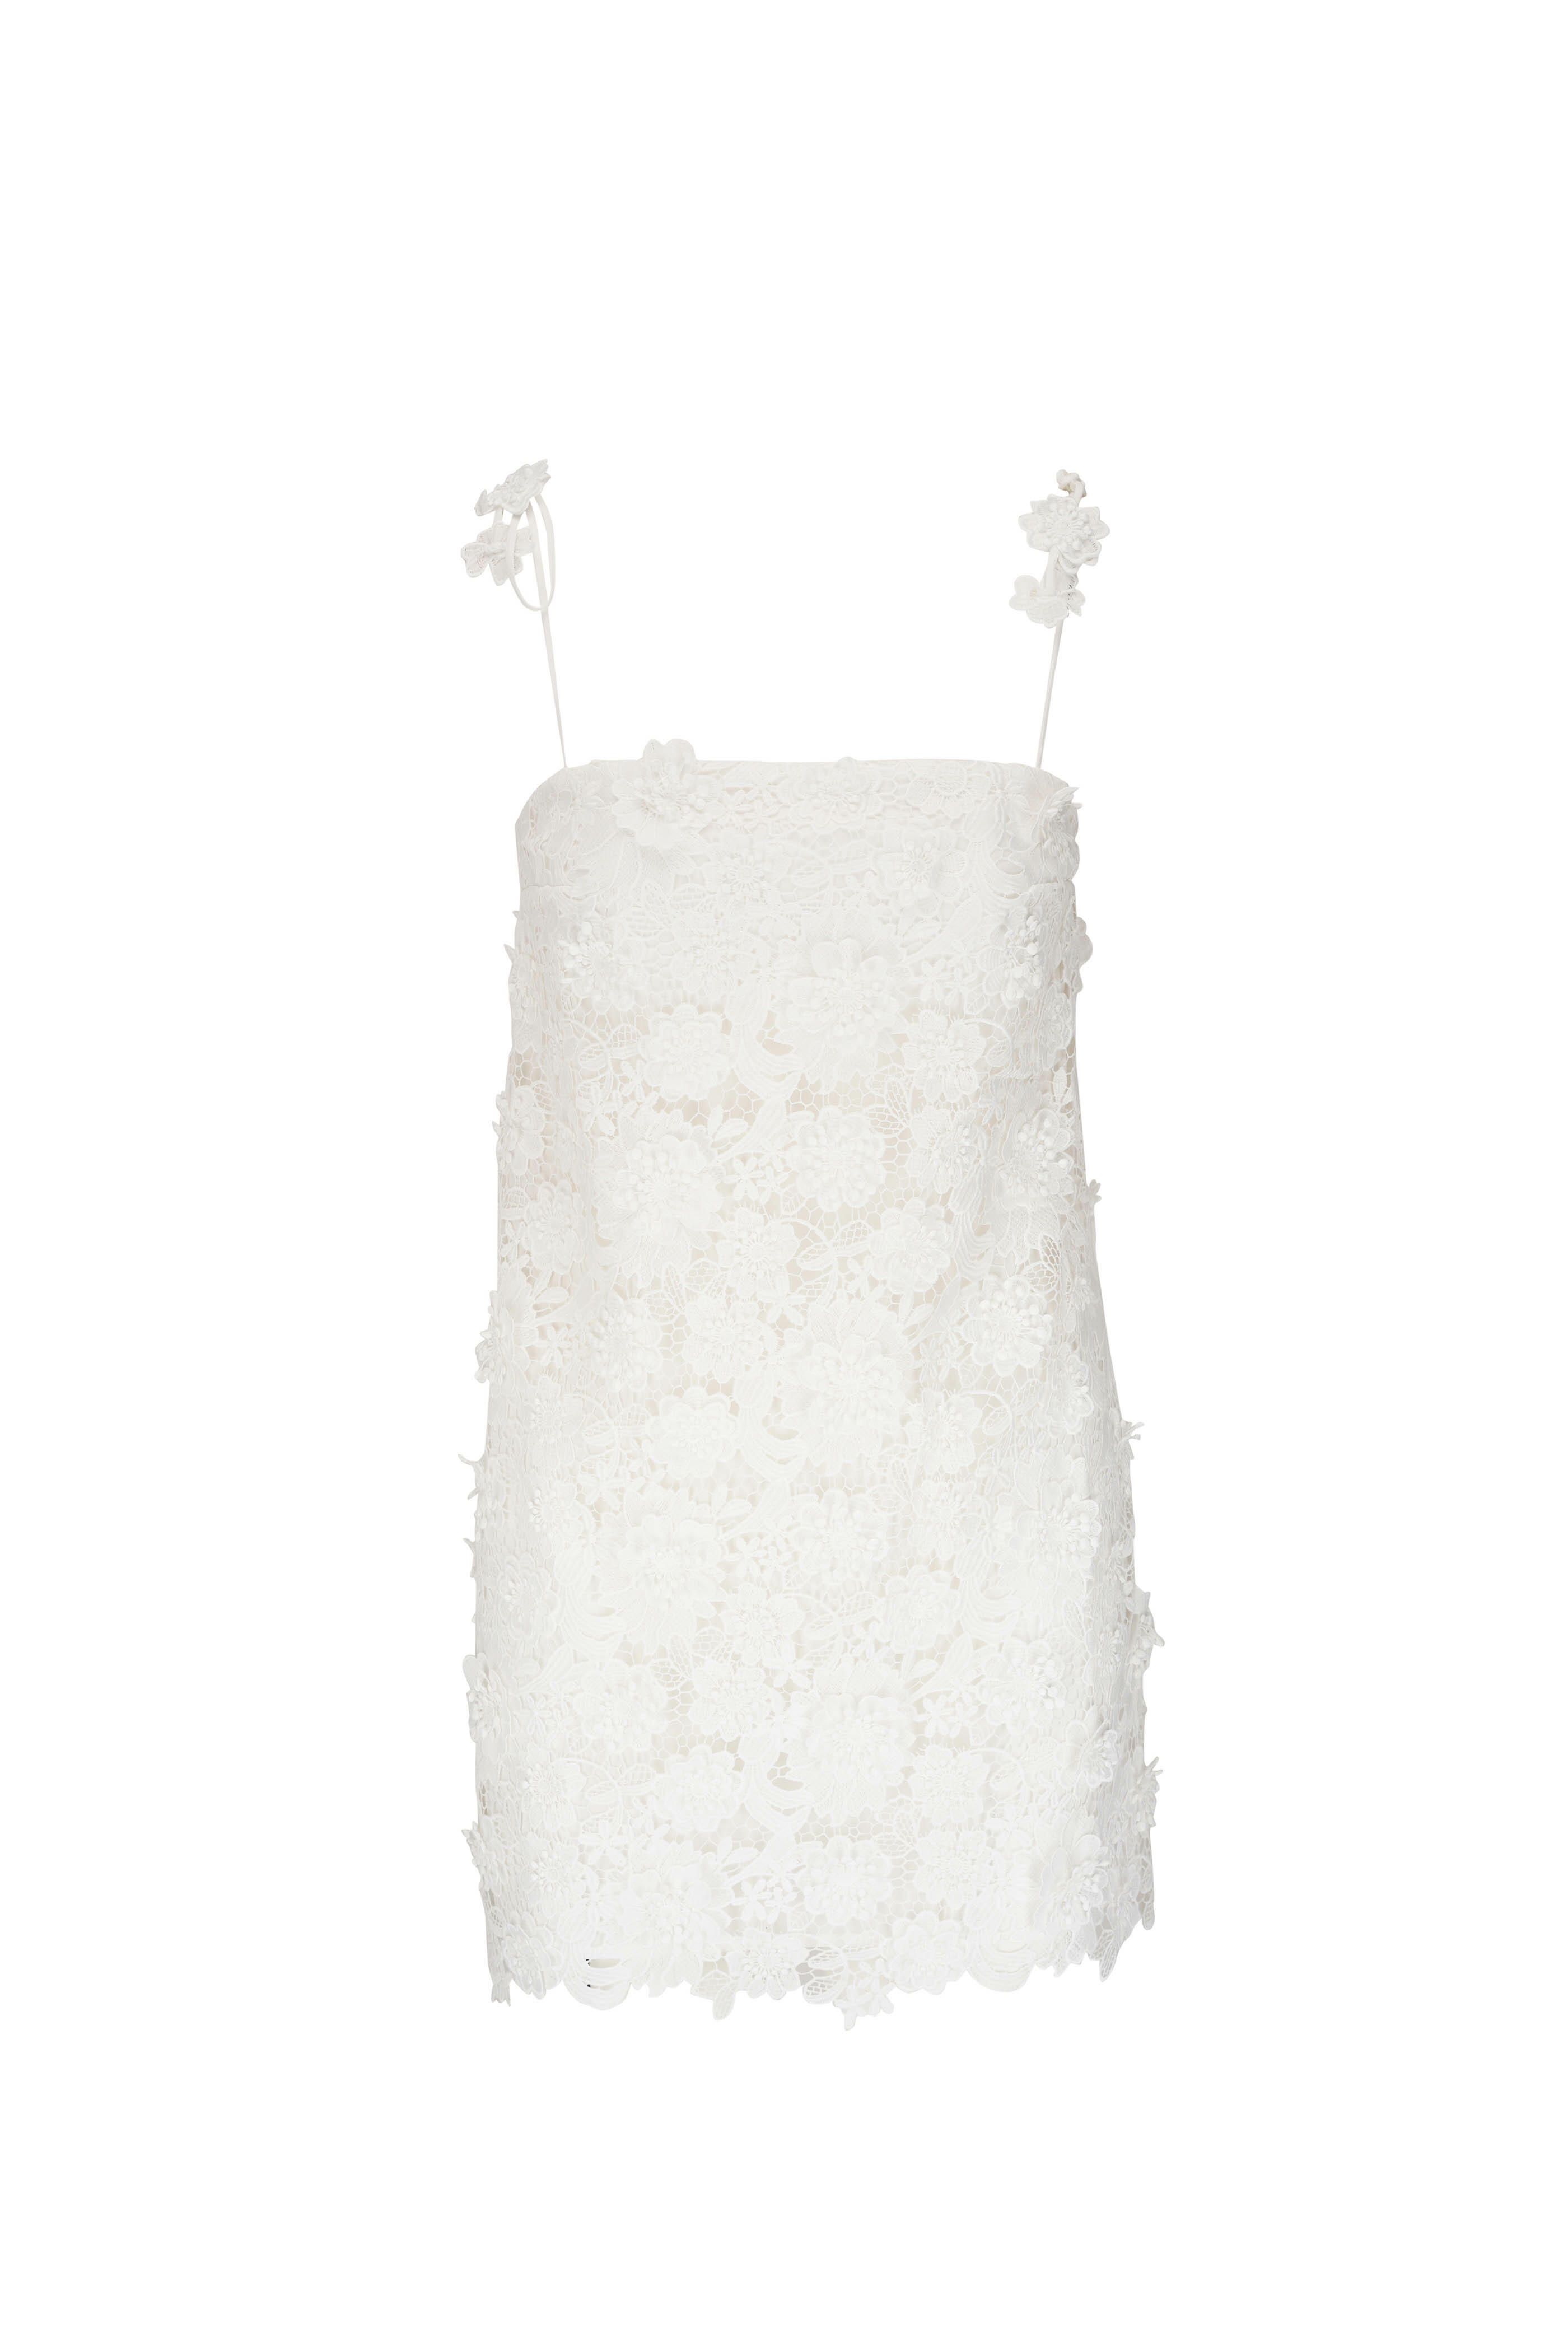 Zimmermann Iris Lace And Cotton Dress in White